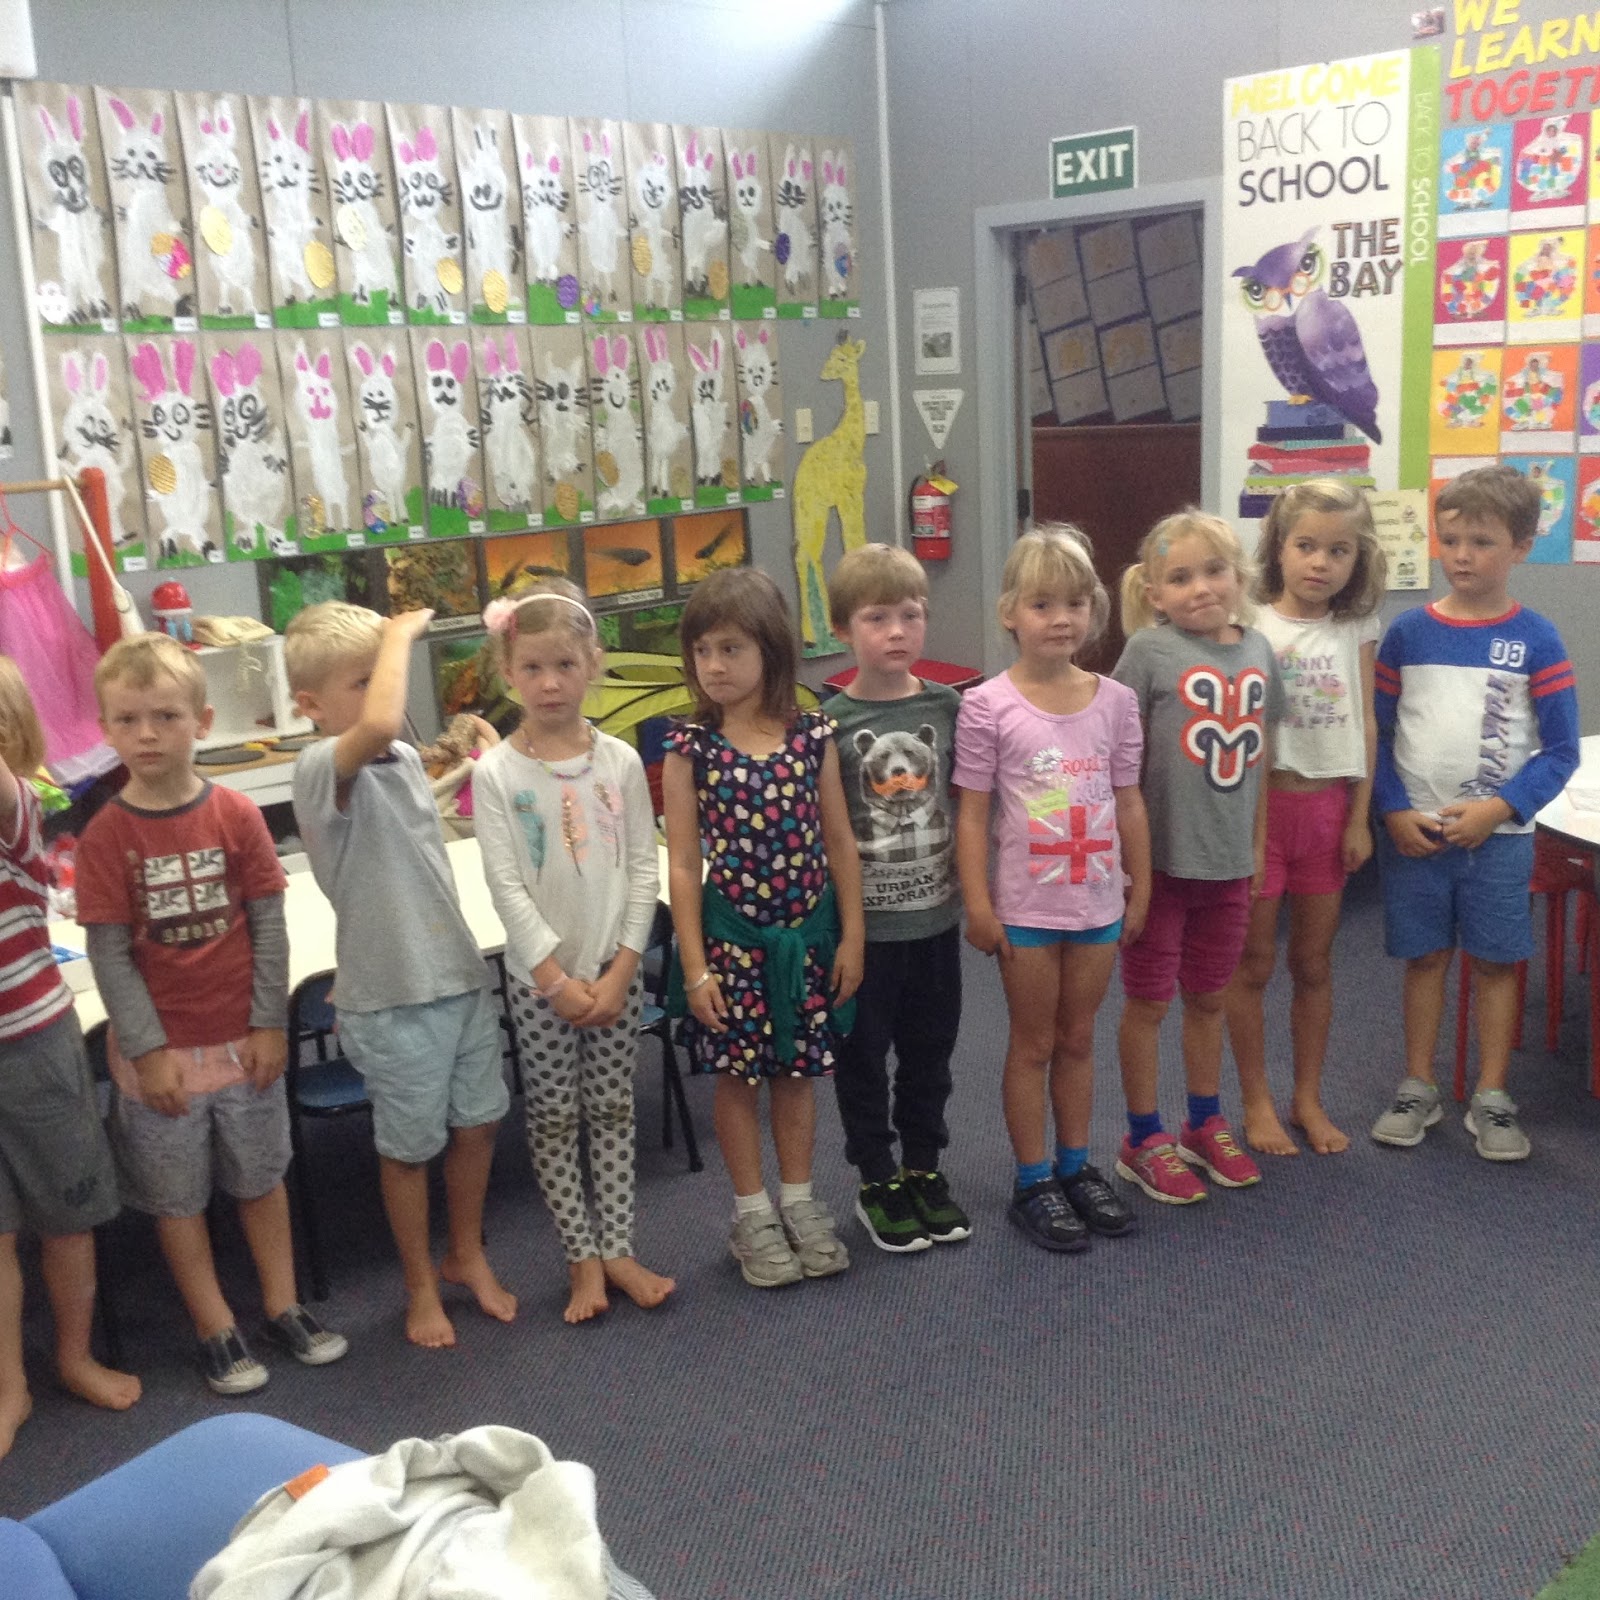 Tay Team Website: Bay Kids Learning To Measure Themselves: Tallest to Shortest